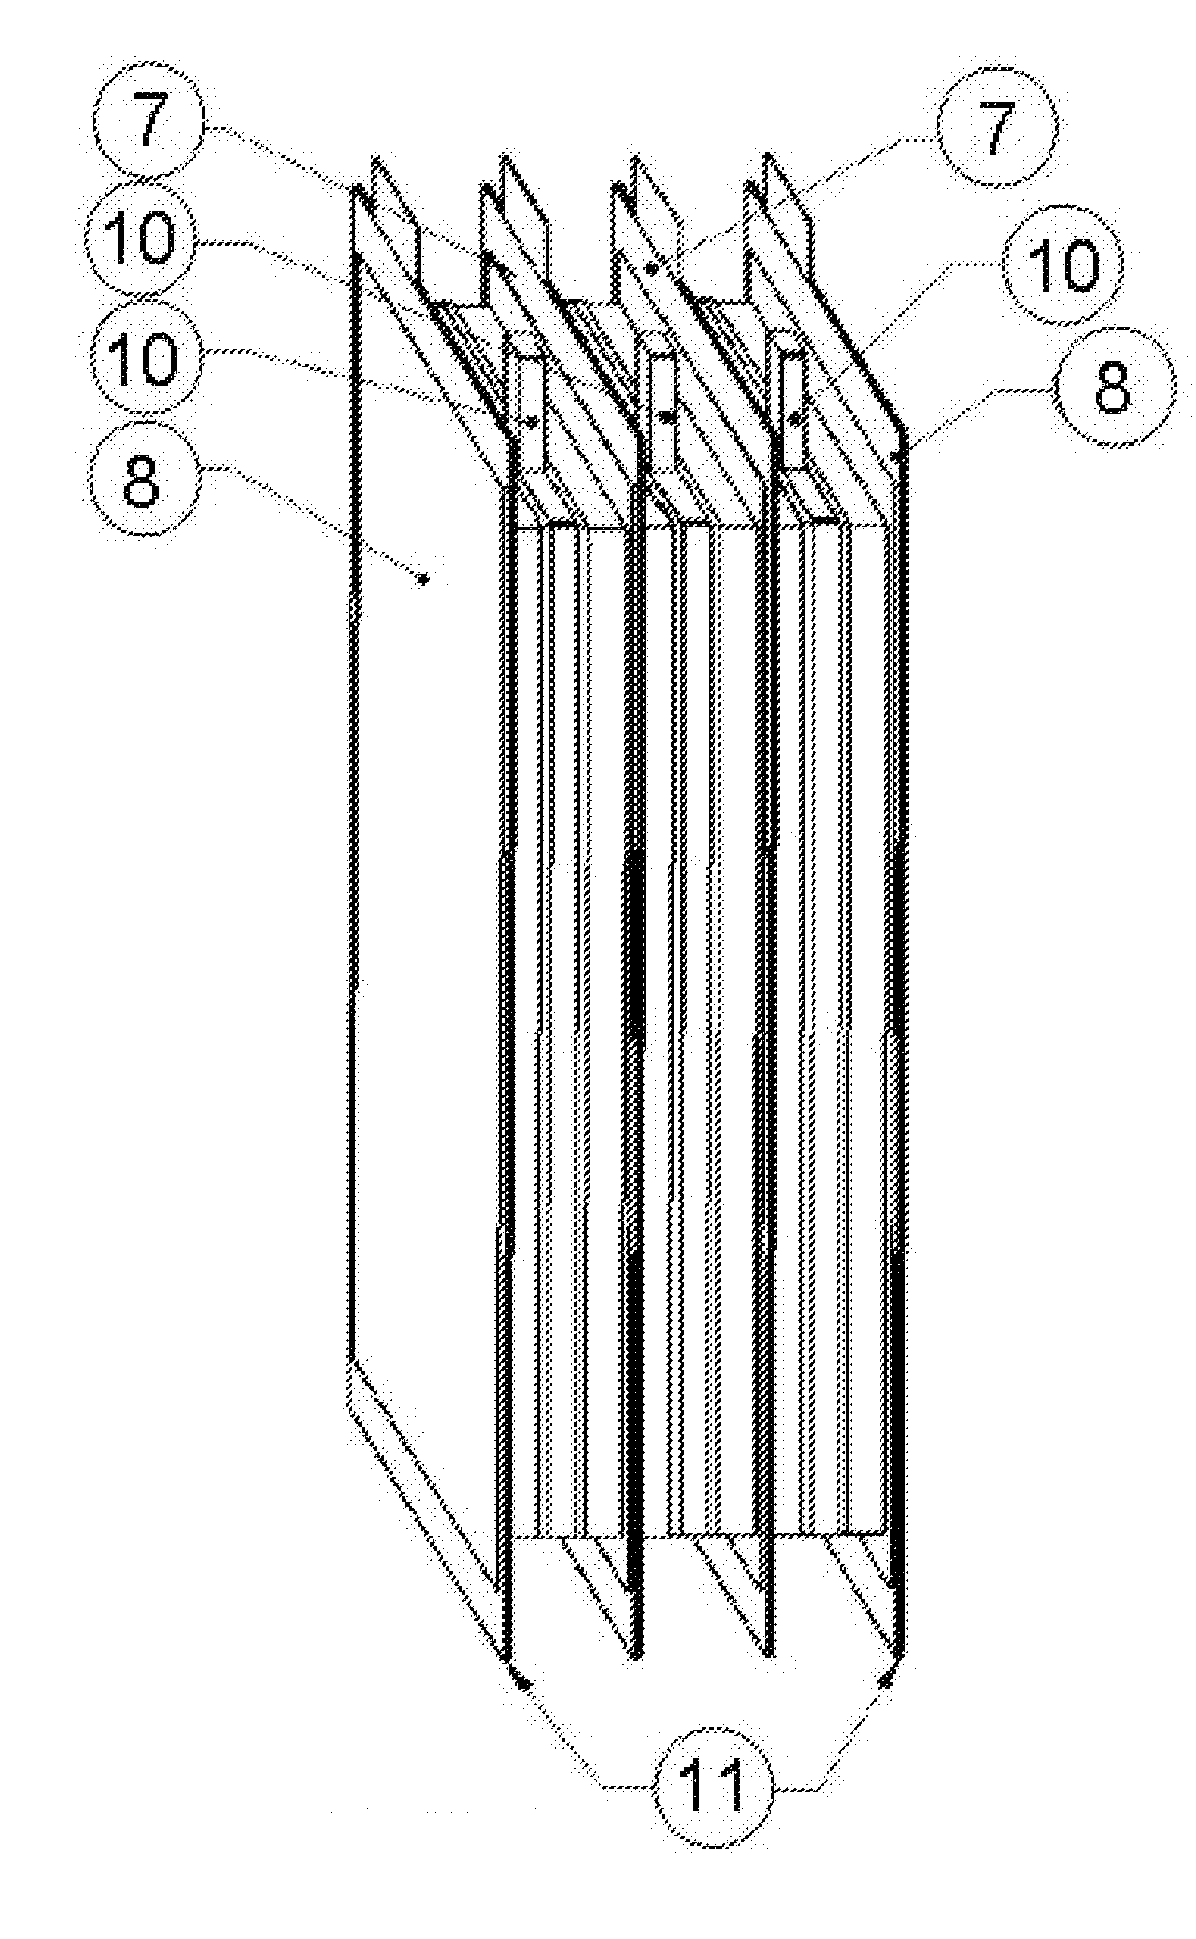 Cell Assemby for an Energy Storage Device Using PTFE Binder in Activated Carbon Electrodes